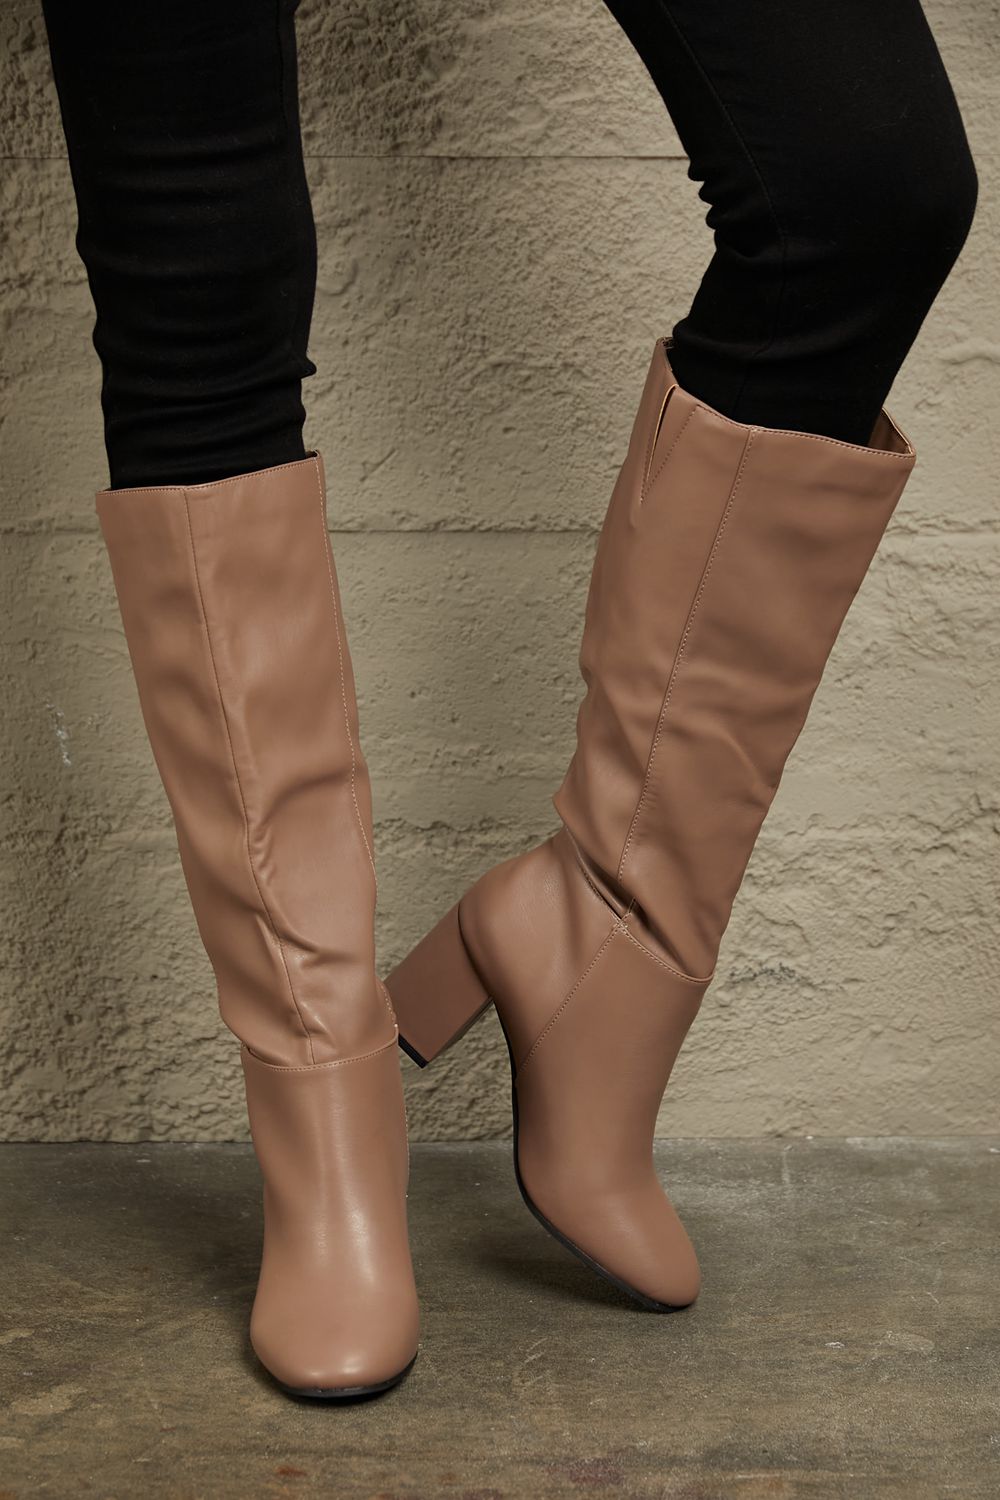 East Lion Corp Block Heel Knee High Boots - Fashion Girl Online Store